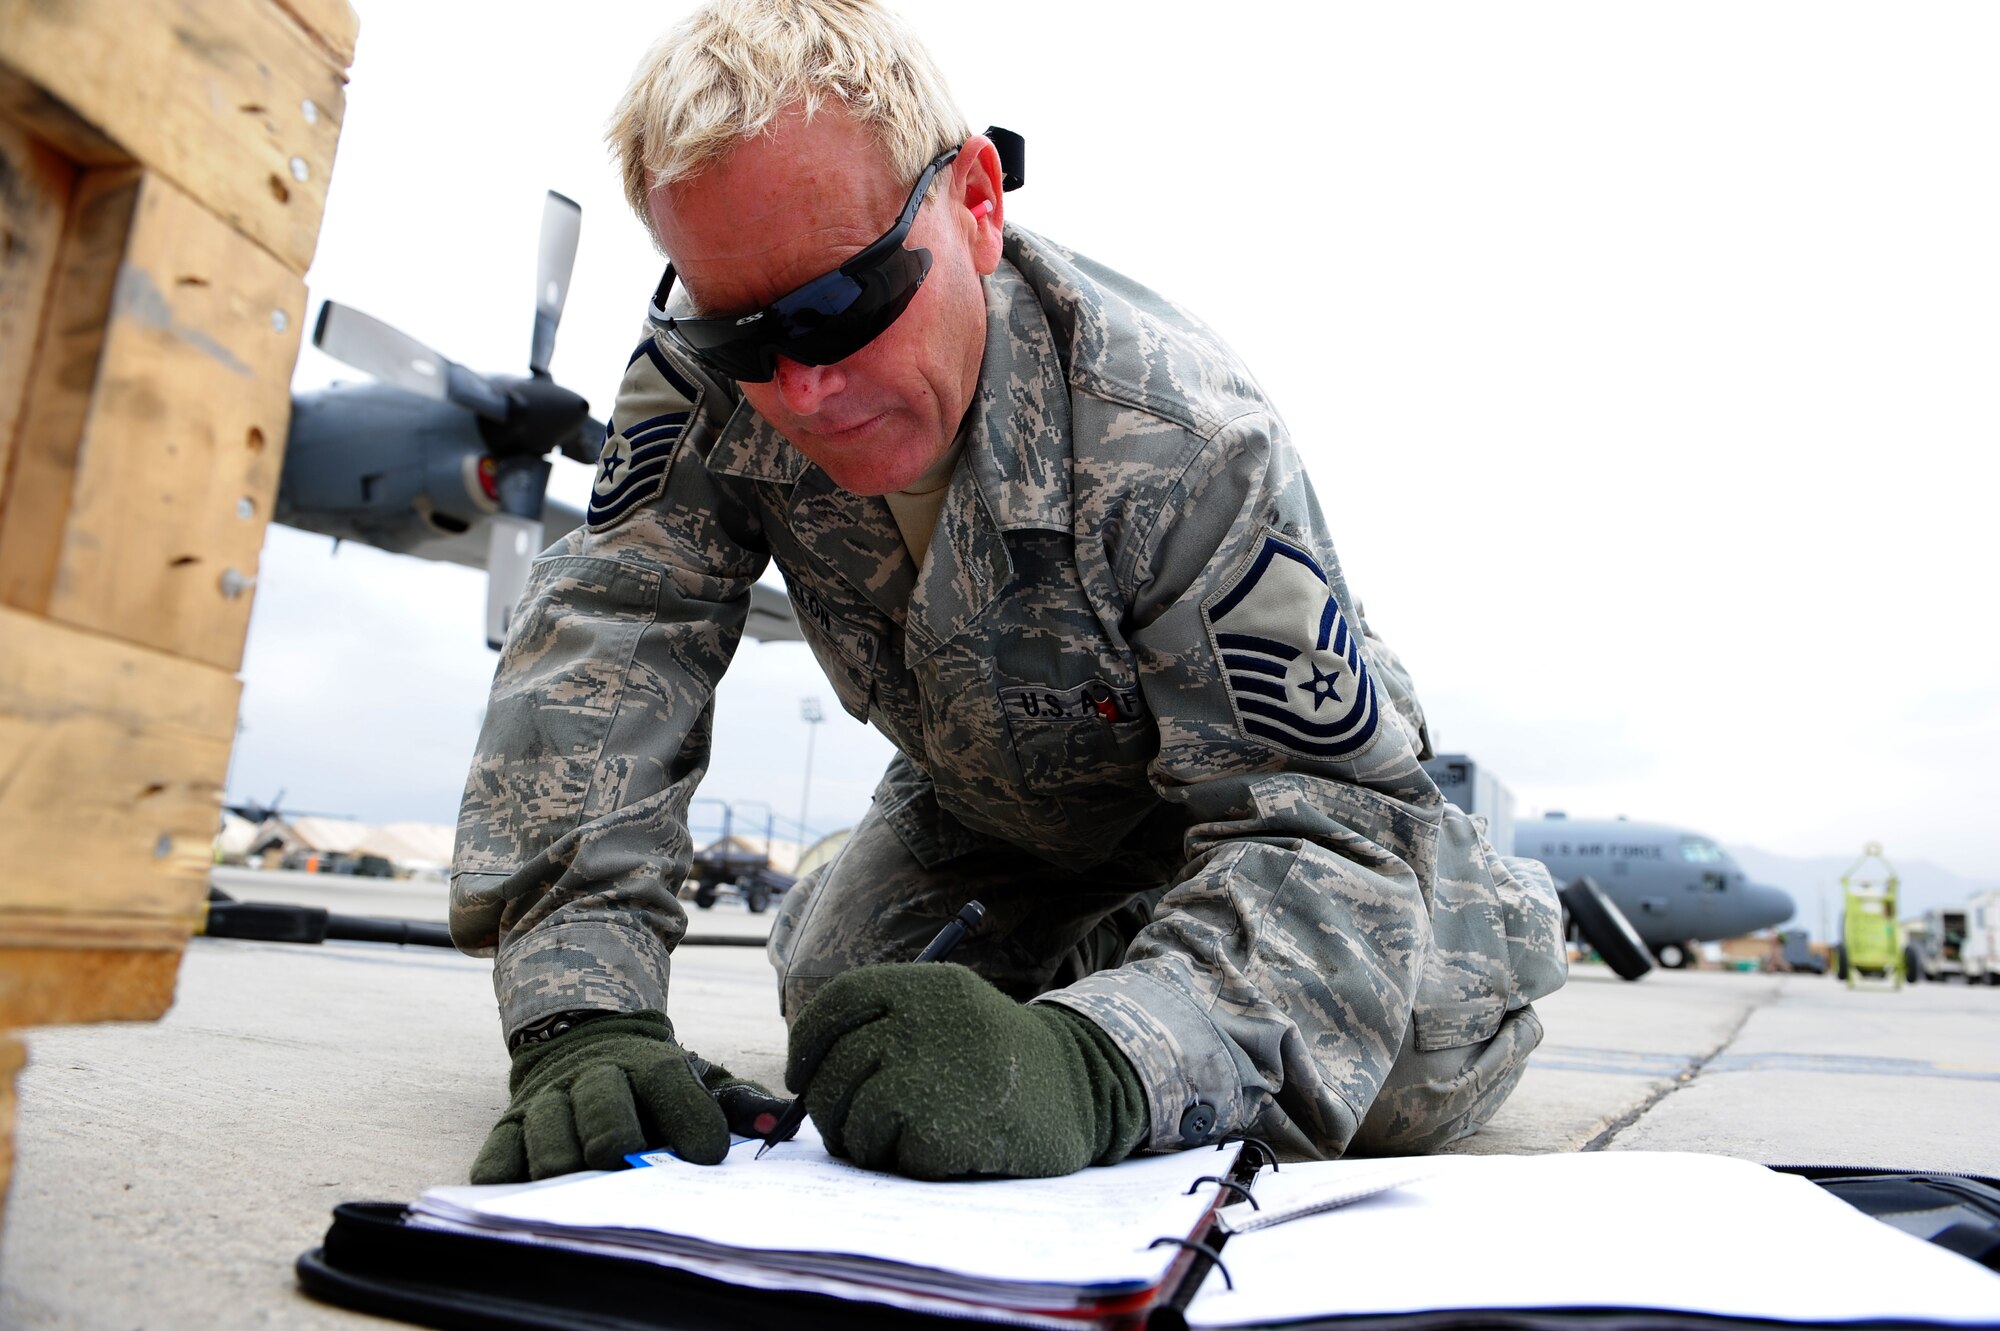 U.S. Air Force Master Sgt. Jeff Dillon, 455th Expeditionary Aircraft Maintenance Squadron crew chief, fills out the repair log after changing out the front tires for a C-130 Hercules aircraft at Bagram Airfield, Afghanistan, April 9, 2011. Dillon is deployed from the Delaware Air National Guard’s 166th Aircraft Maintenance Squadron, New Castle, Del., supporting Operation Enduring Freedom. (U.S. Air Force photo/Master Sgt. William Greer)